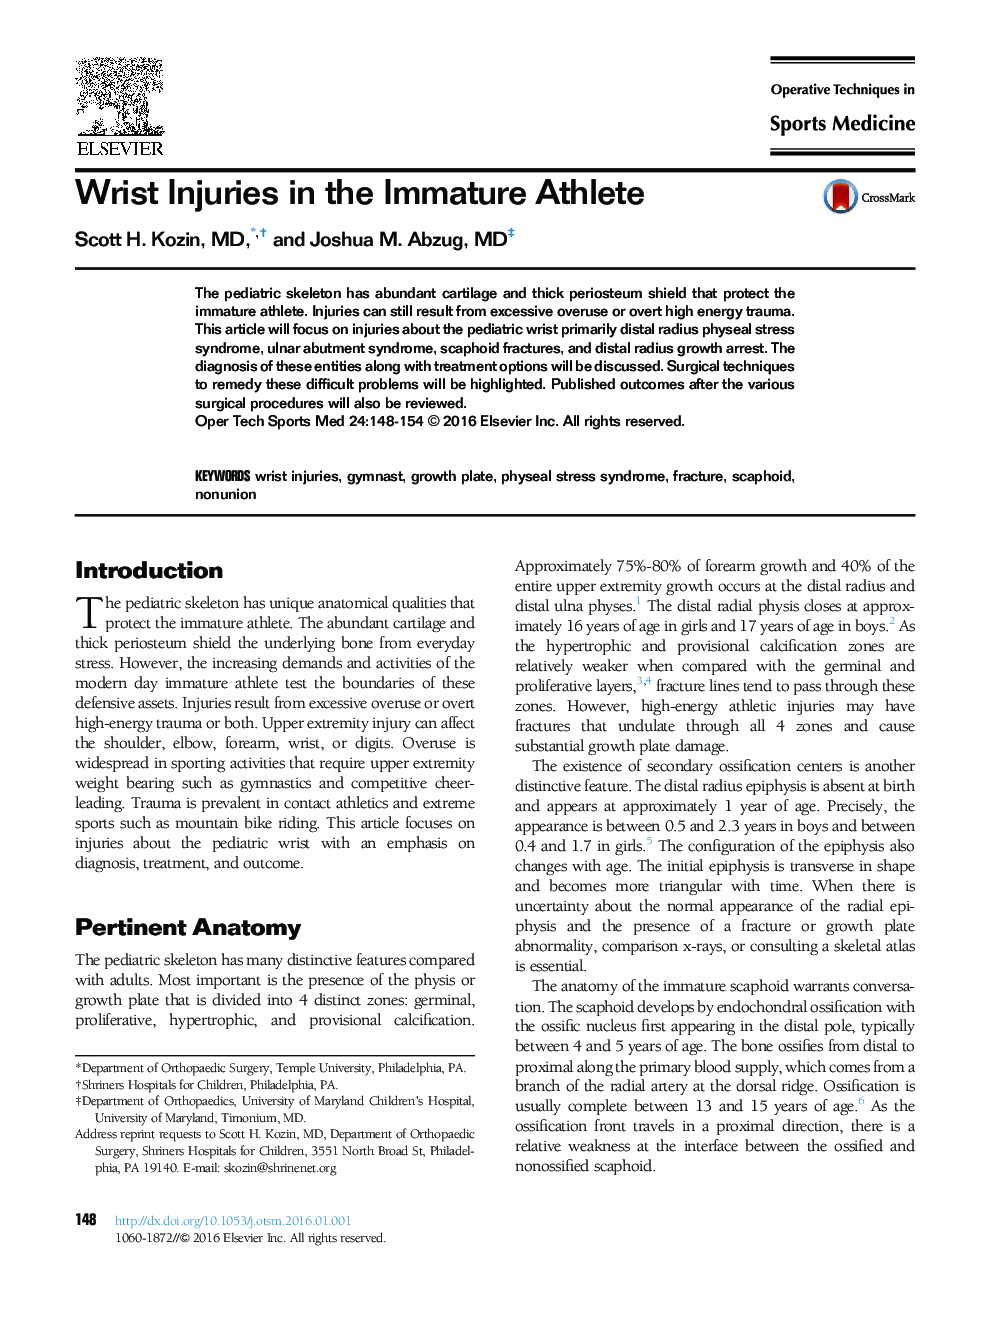 Wrist Injuries in the Immature Athlete